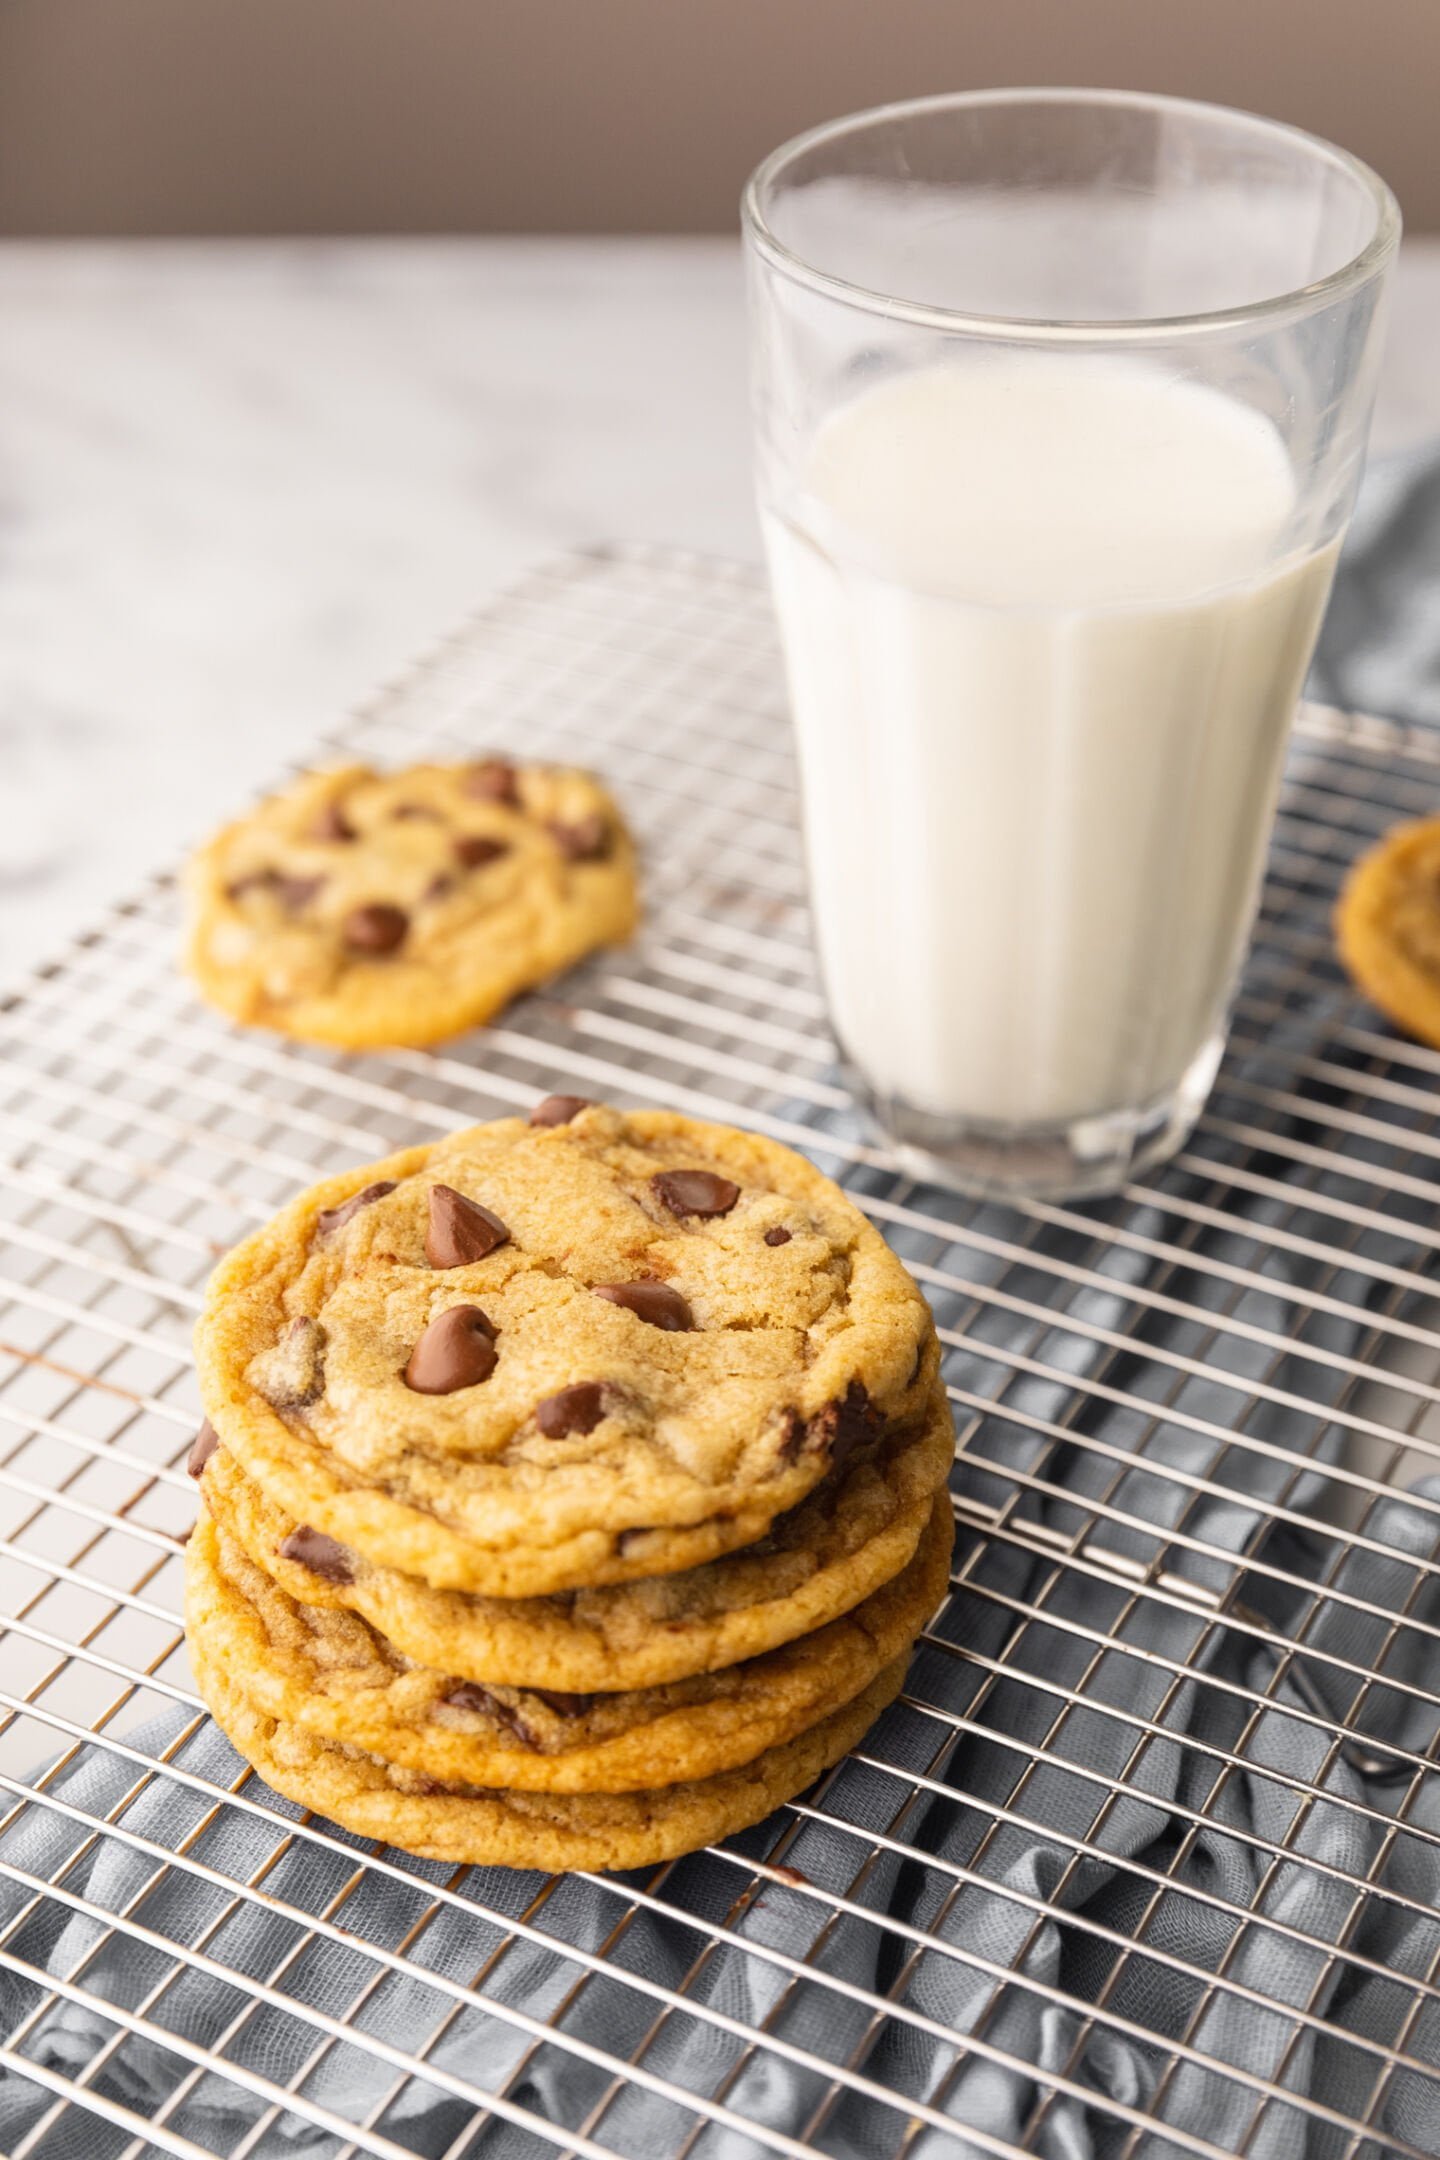 Chocolate chip cookies with glass of milk